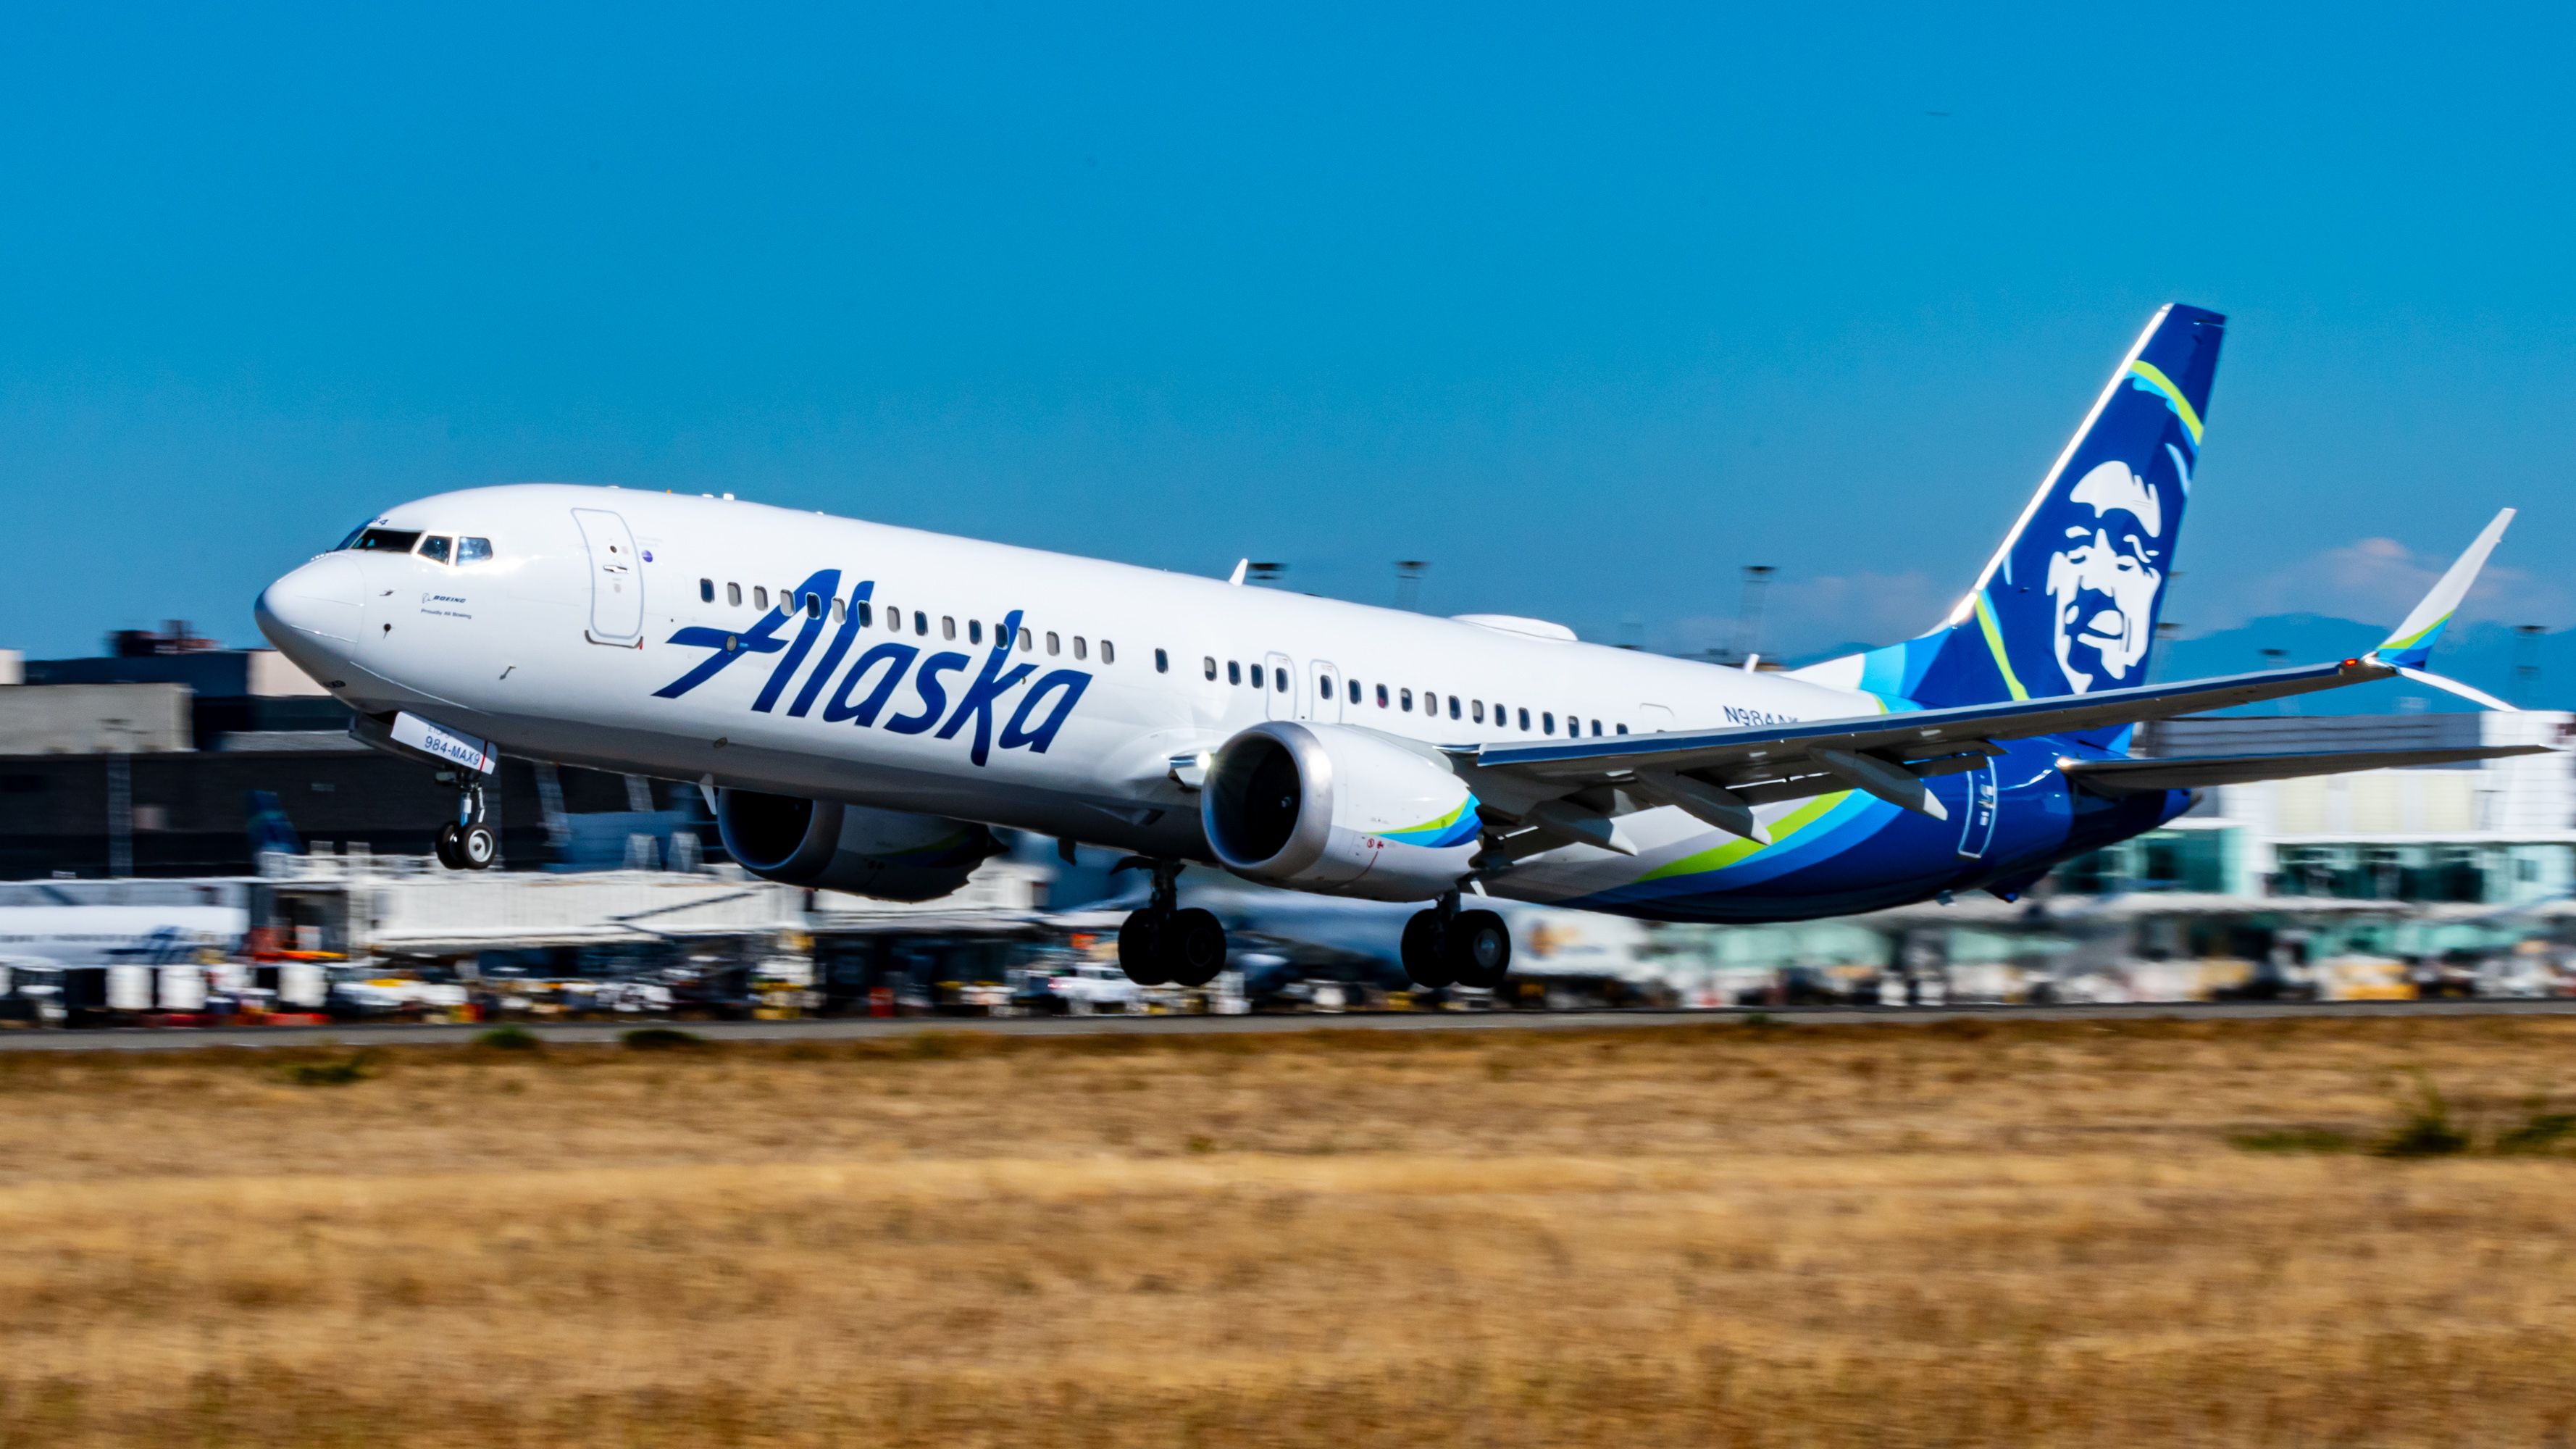 Filming an Alaska Airlines 737 9 MAX taking off from the ocean